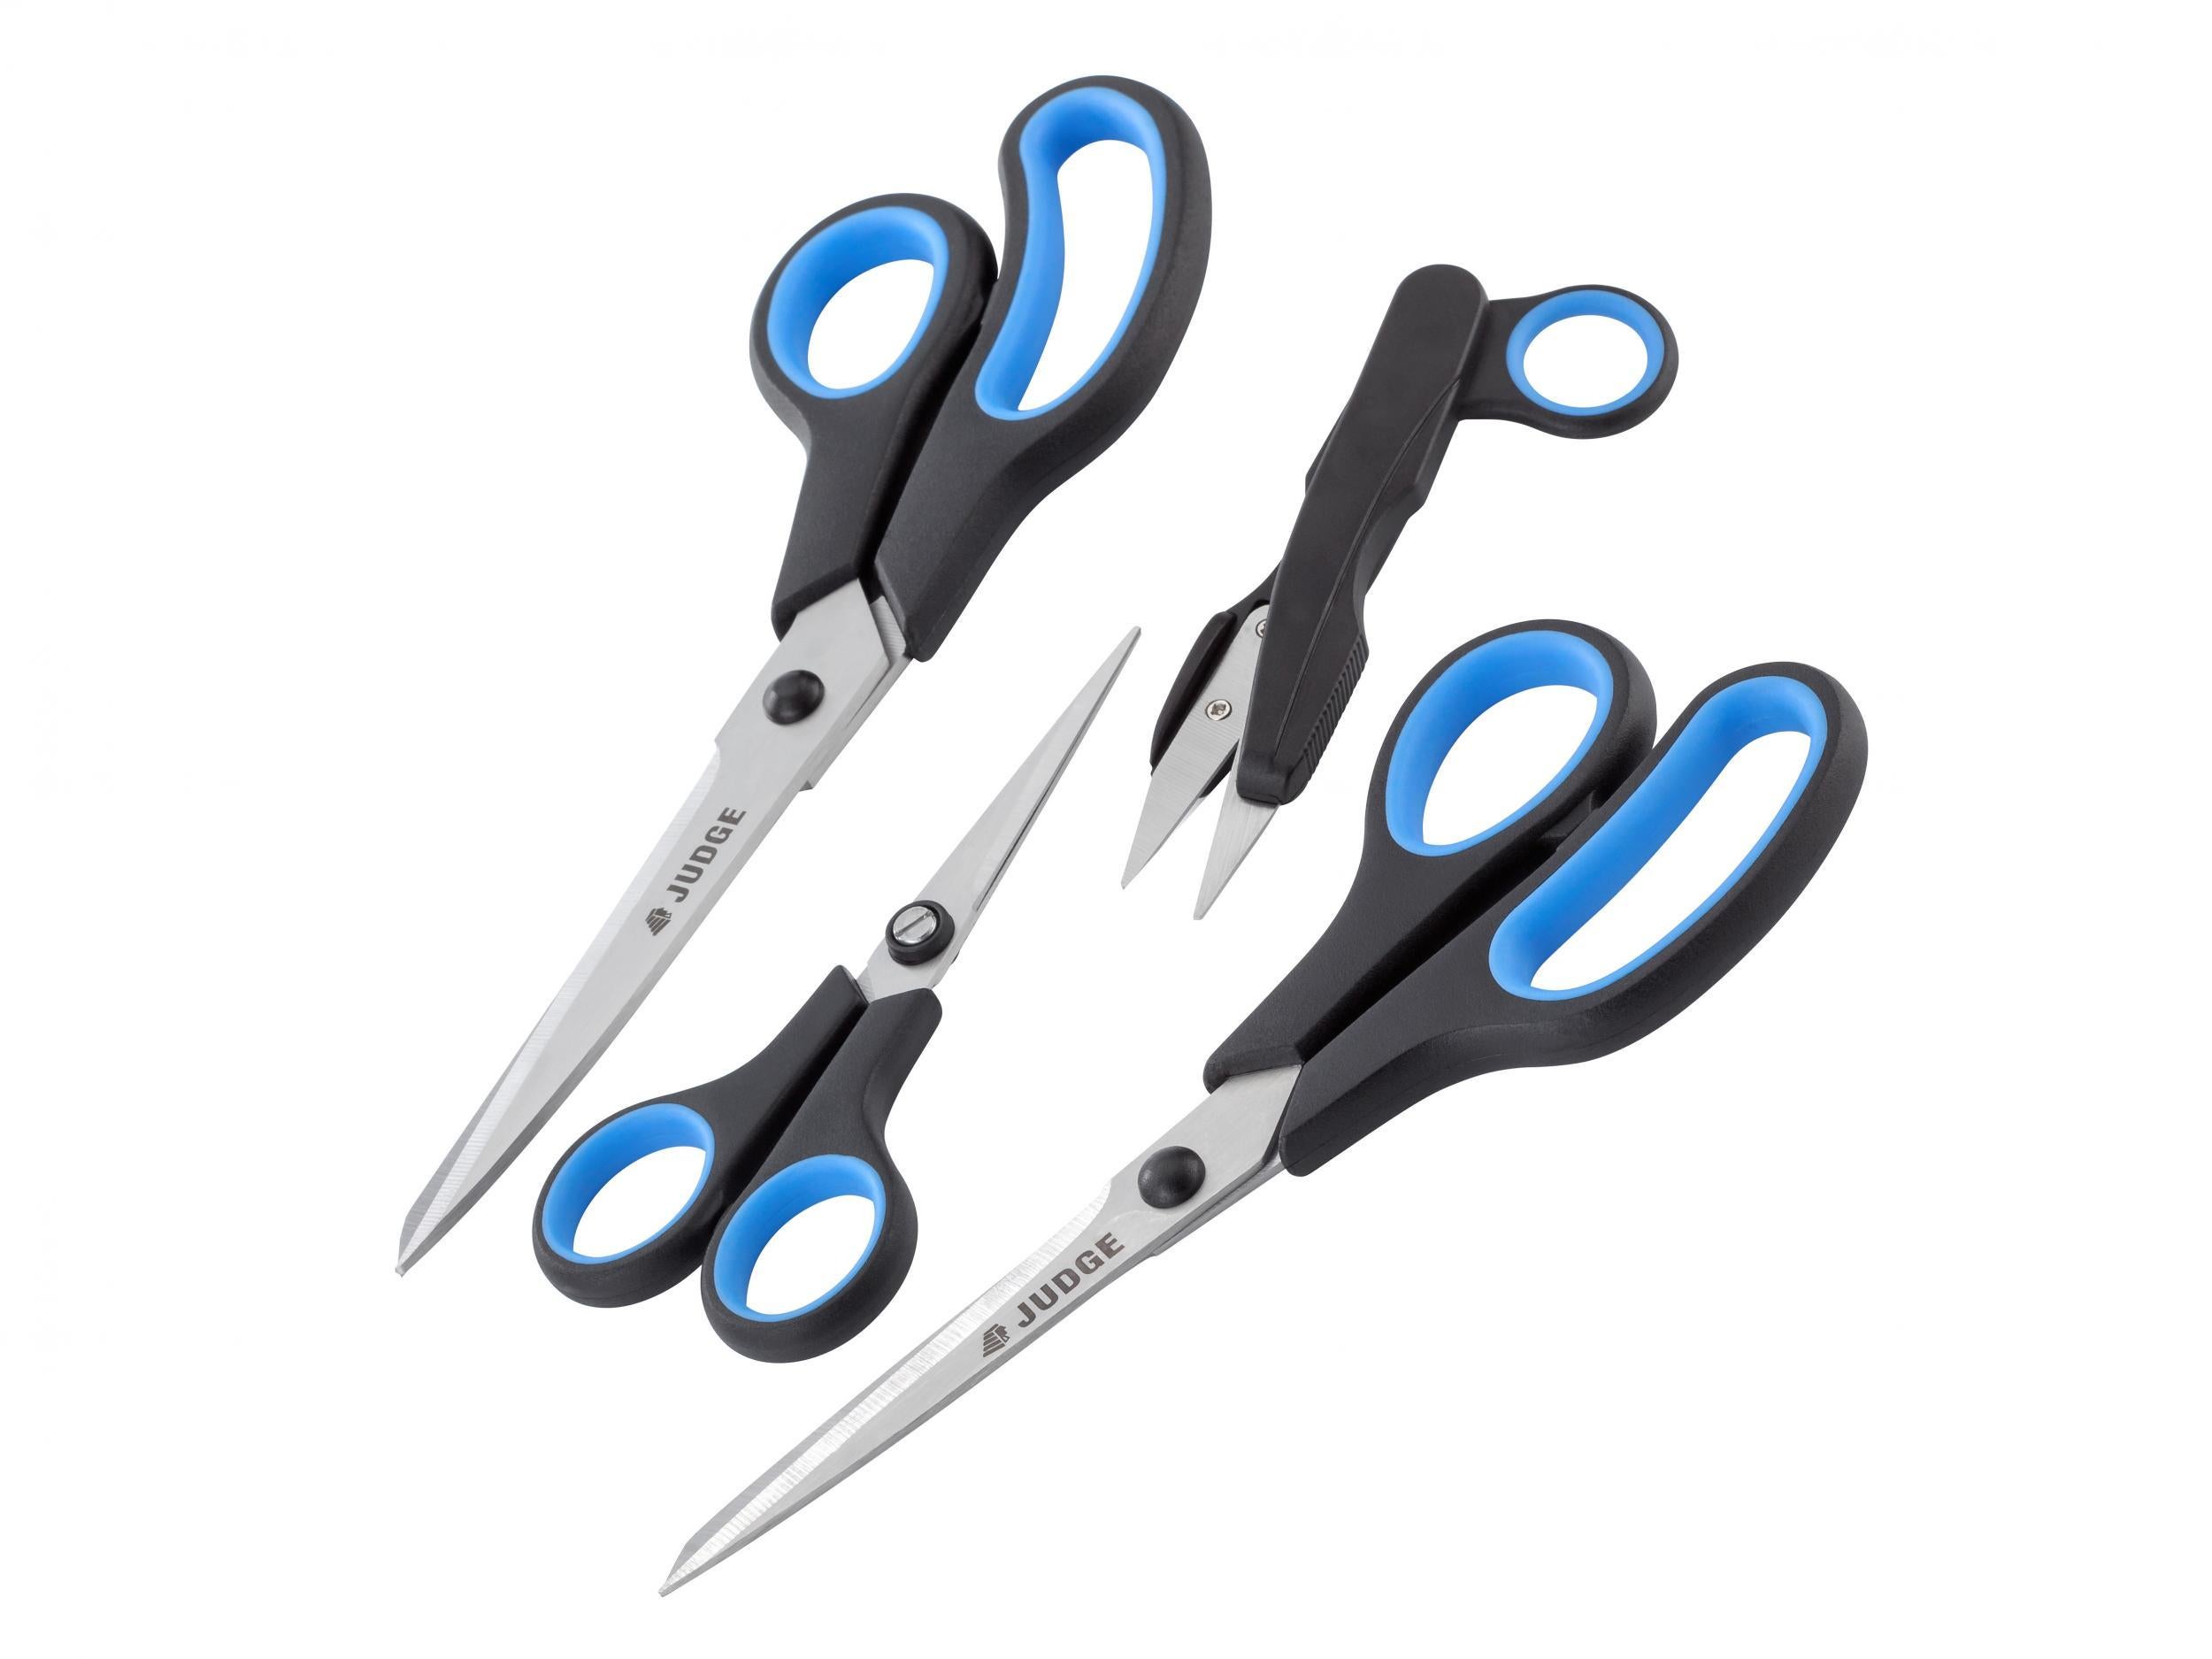 Do You Really Need Kitchen Scissors? – Dalstrong UK